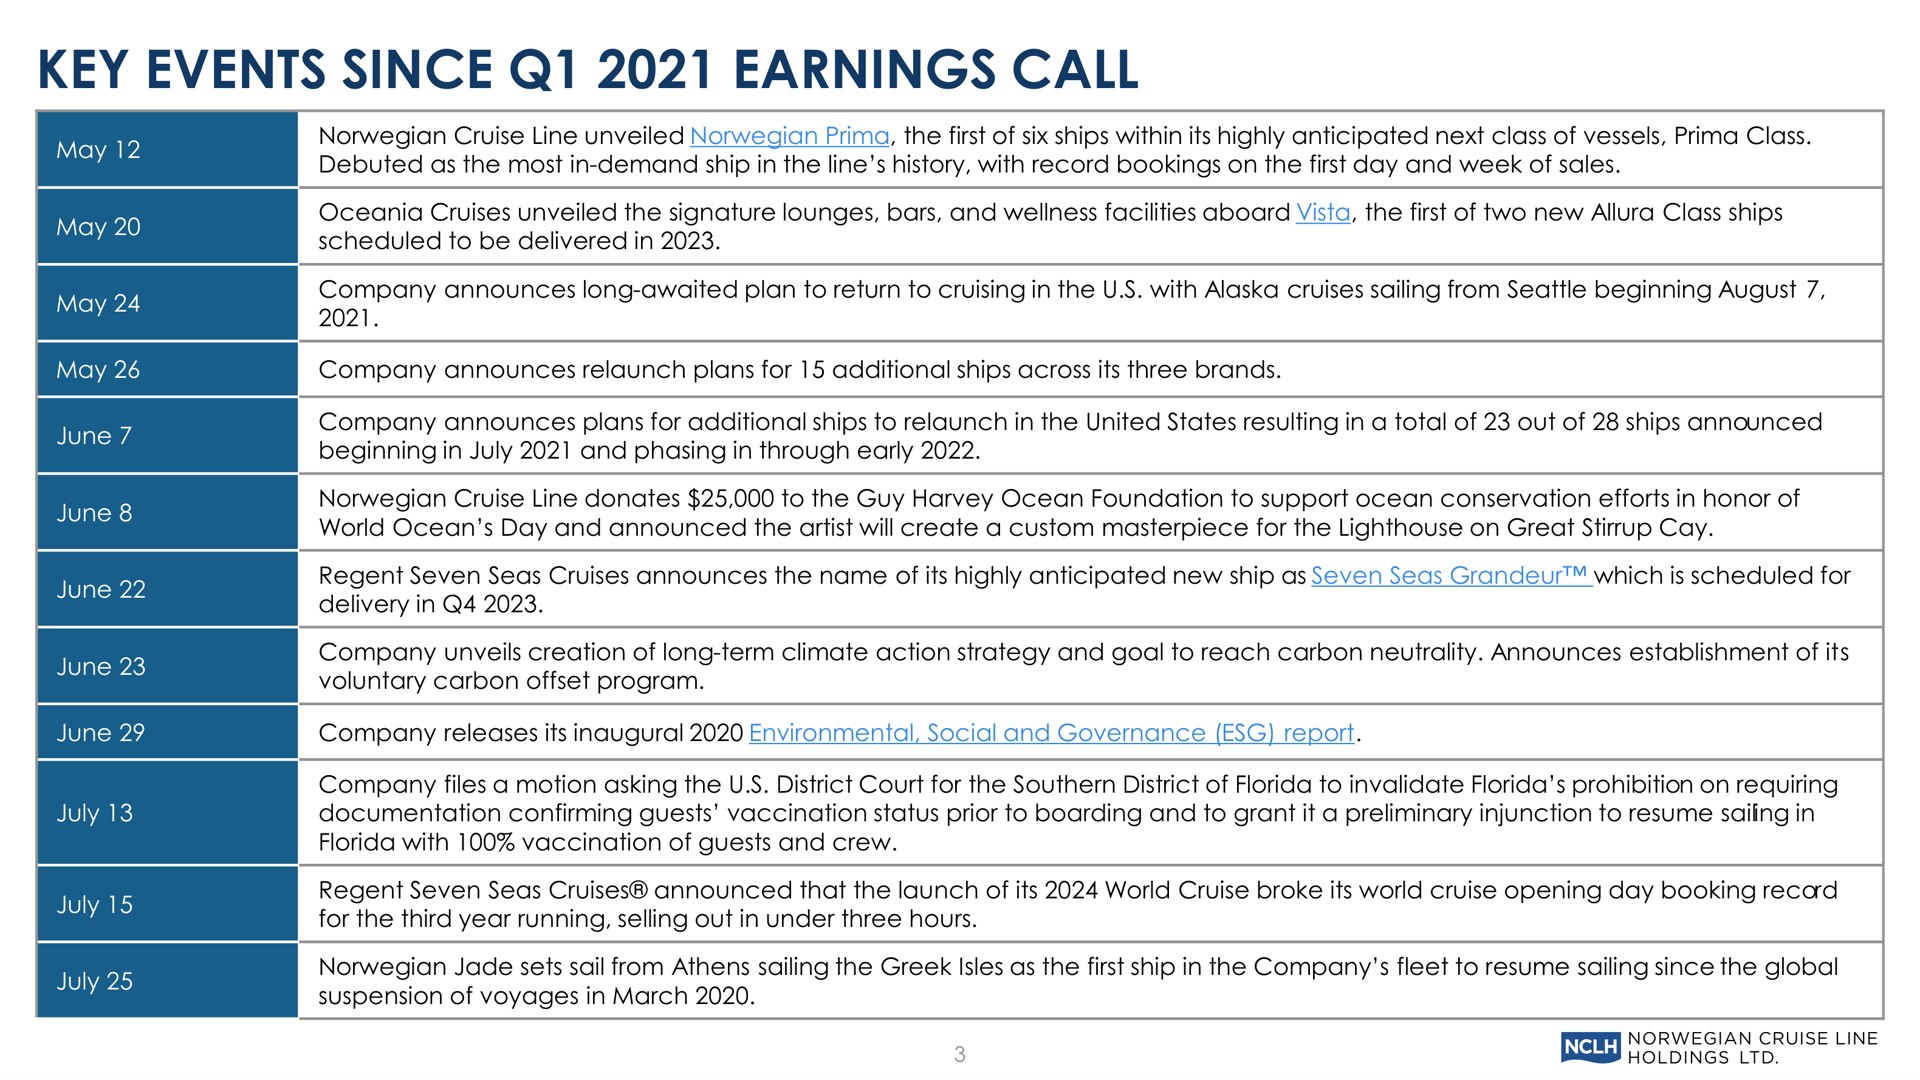 key events since earnings call | Norwegian Cruise Line